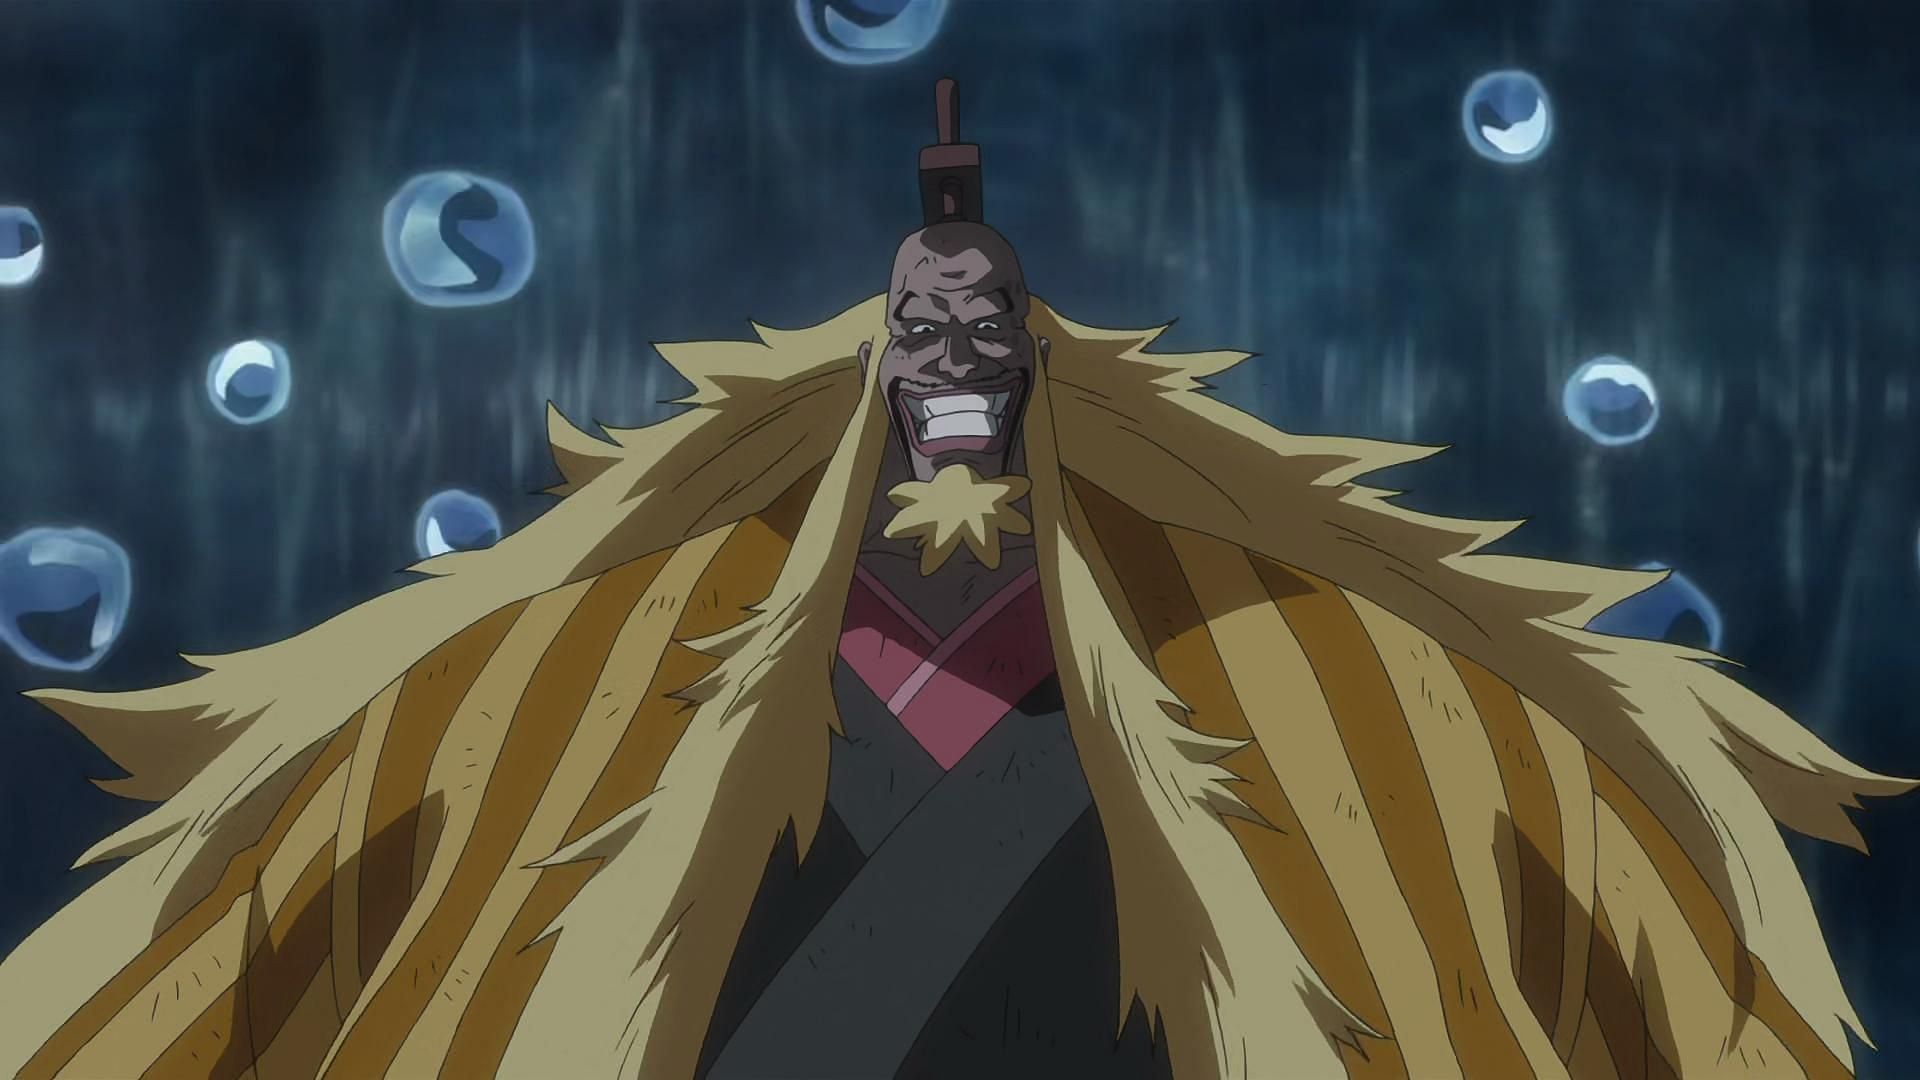 Shiki as seen in One Piece (Image via Toei Animation, One Piece)